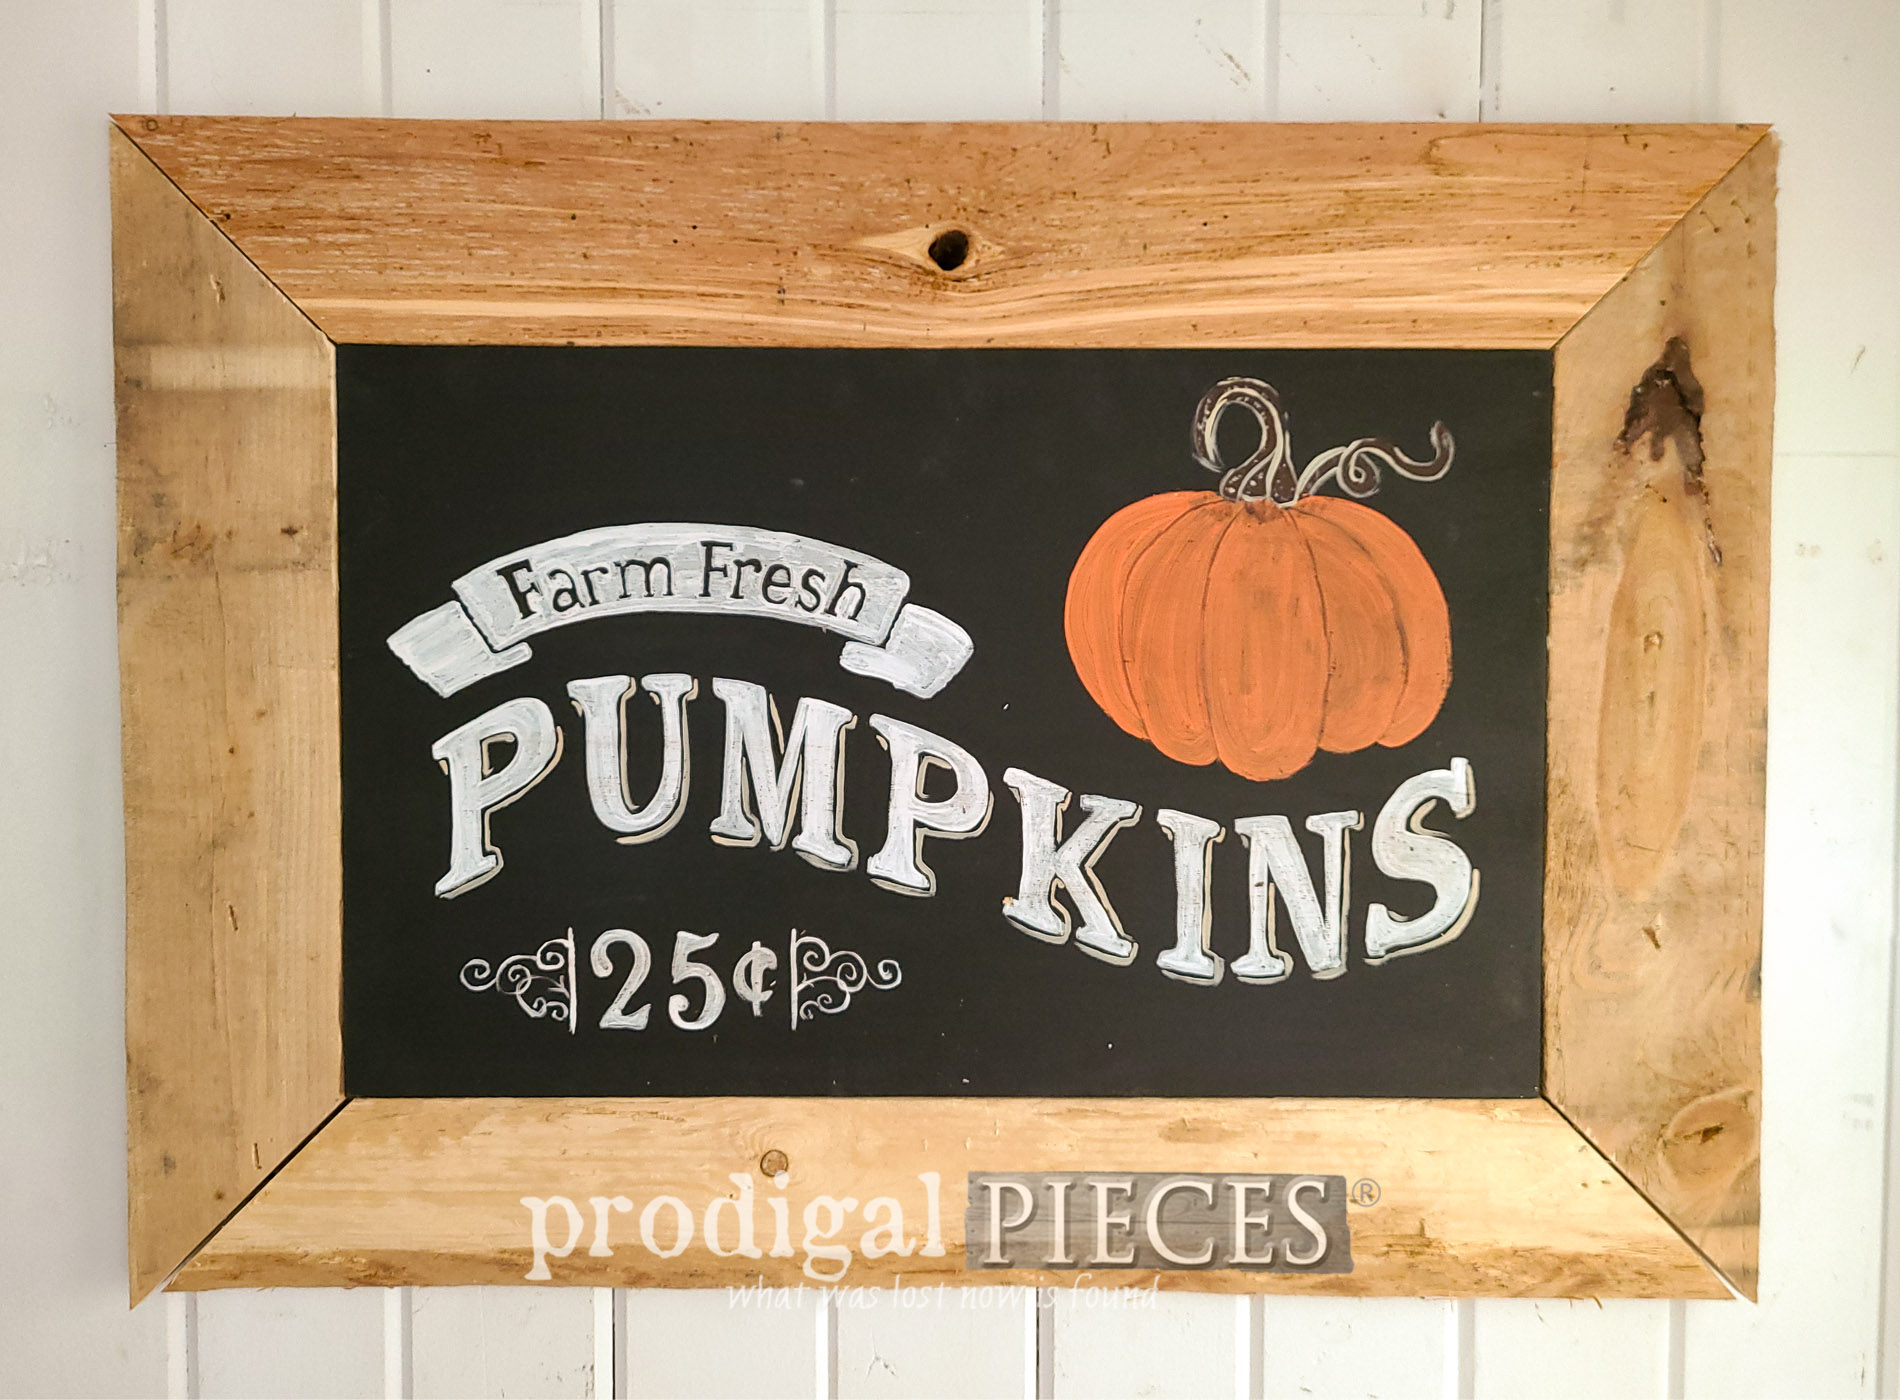 Featured DIY Harvest Sign in 3 Styles by Larissa of Prodigal Pieces | prodigalpieces.com #prodigalpieces #fall #farmhouse #diy #upcycled #home #homedecor